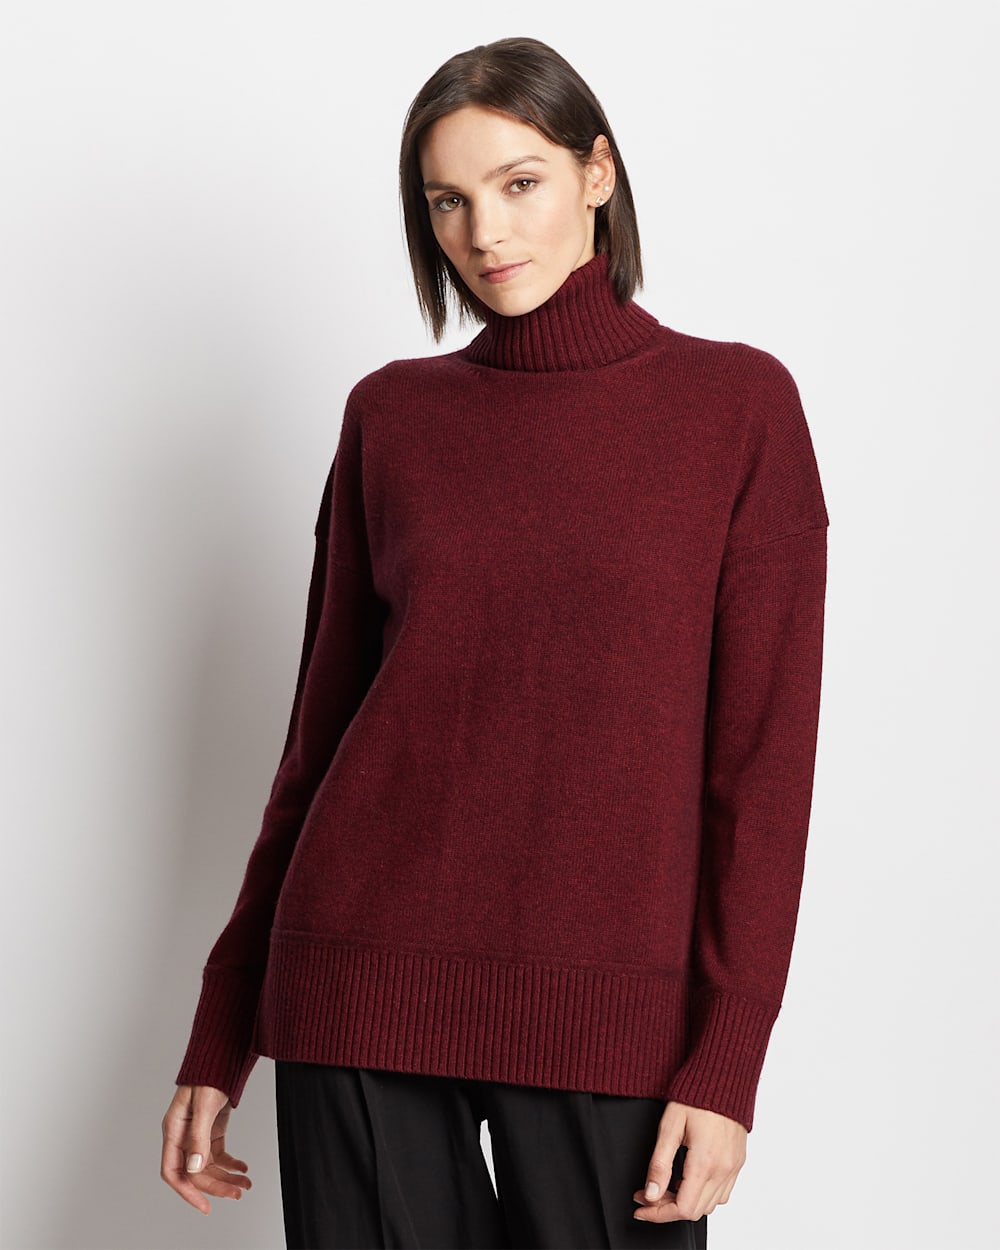 ALTERNATE VIEW OF WOMEN'S MERINO/CASHMERE OVERSIZED TURTLENECK IN BERRY PRESERVE image number 3